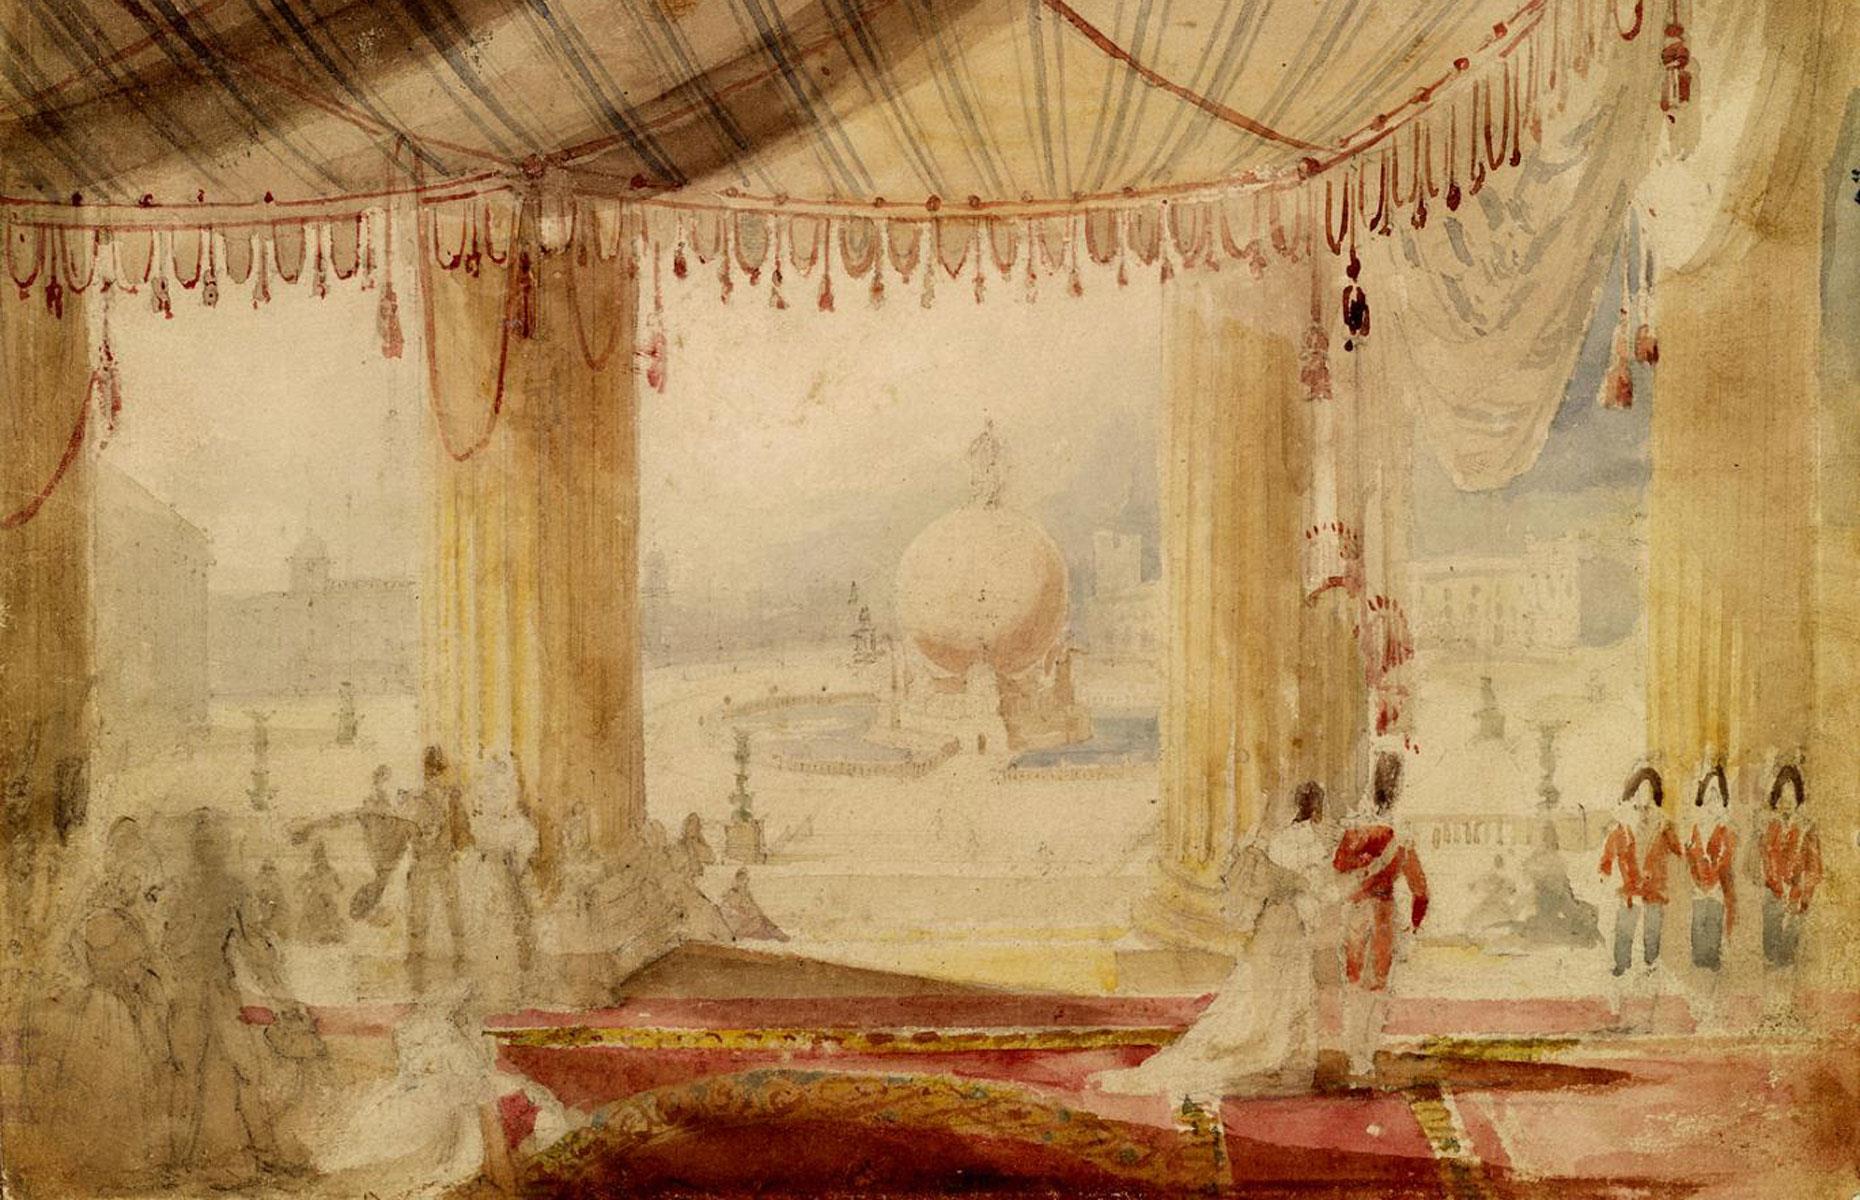 Among the entries was this elegant globe sculpture, which would have been surrounded by a water feature. The design by architect John Goldicott was revealed in this 1841 watercolor painting but didn't impress the judges as much as Railton's column.